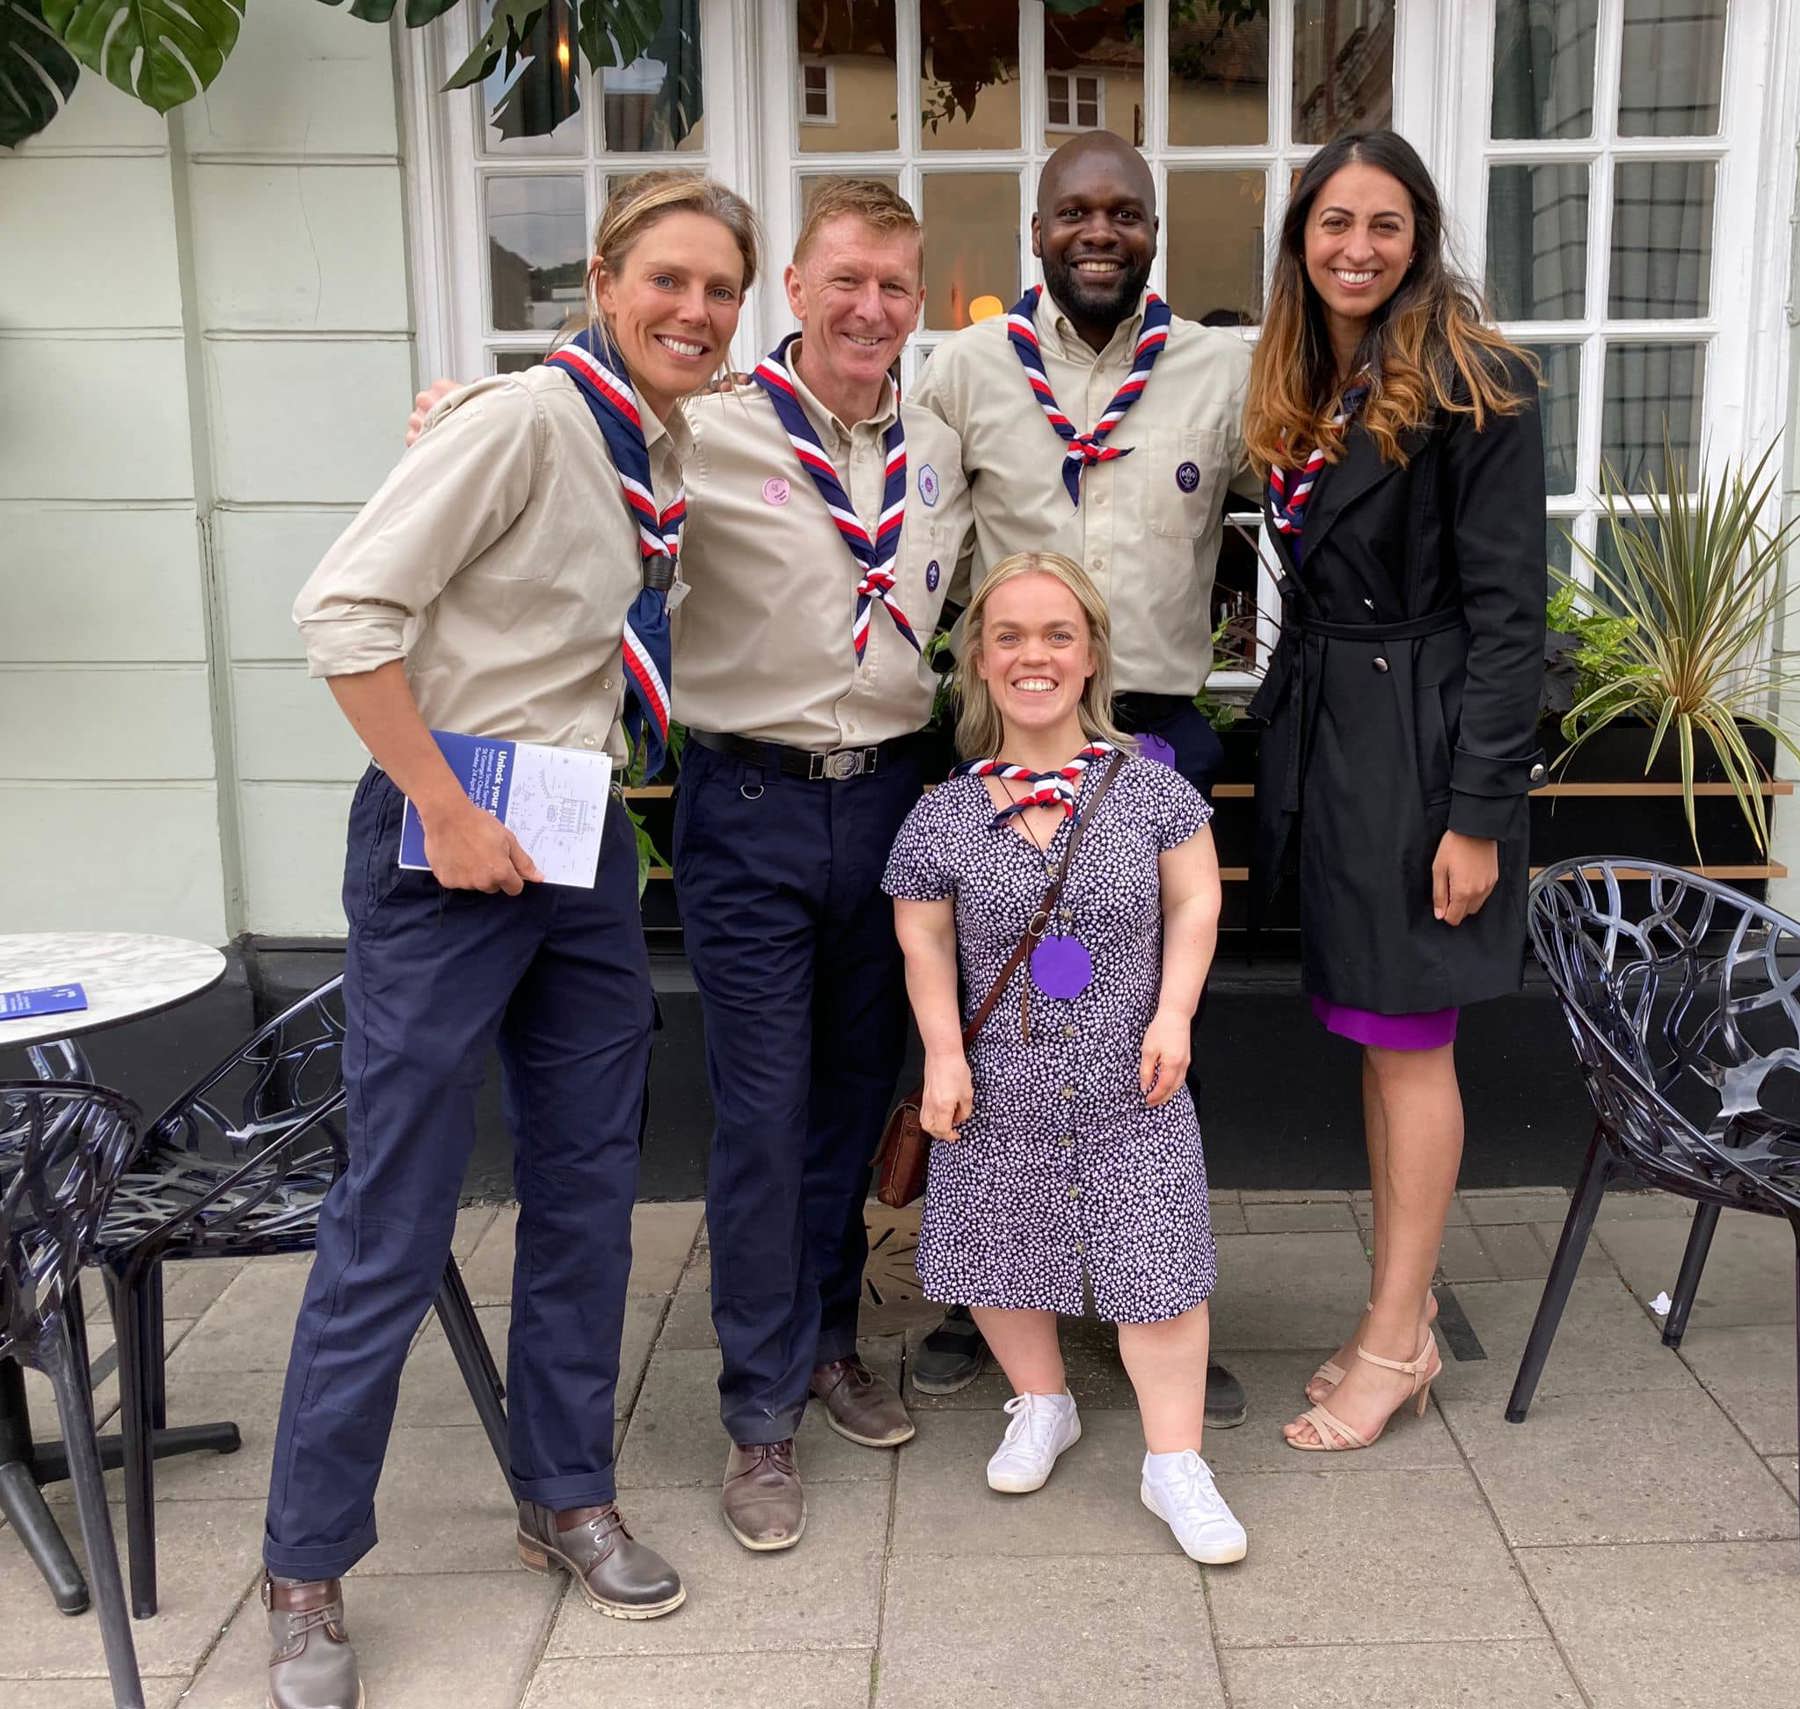 Megan Hine, Tim Peake, Dwayne Fields, Ellie Simmonds, Preet Chandi standing smiling at the camera, all with Scouts uniform or necker